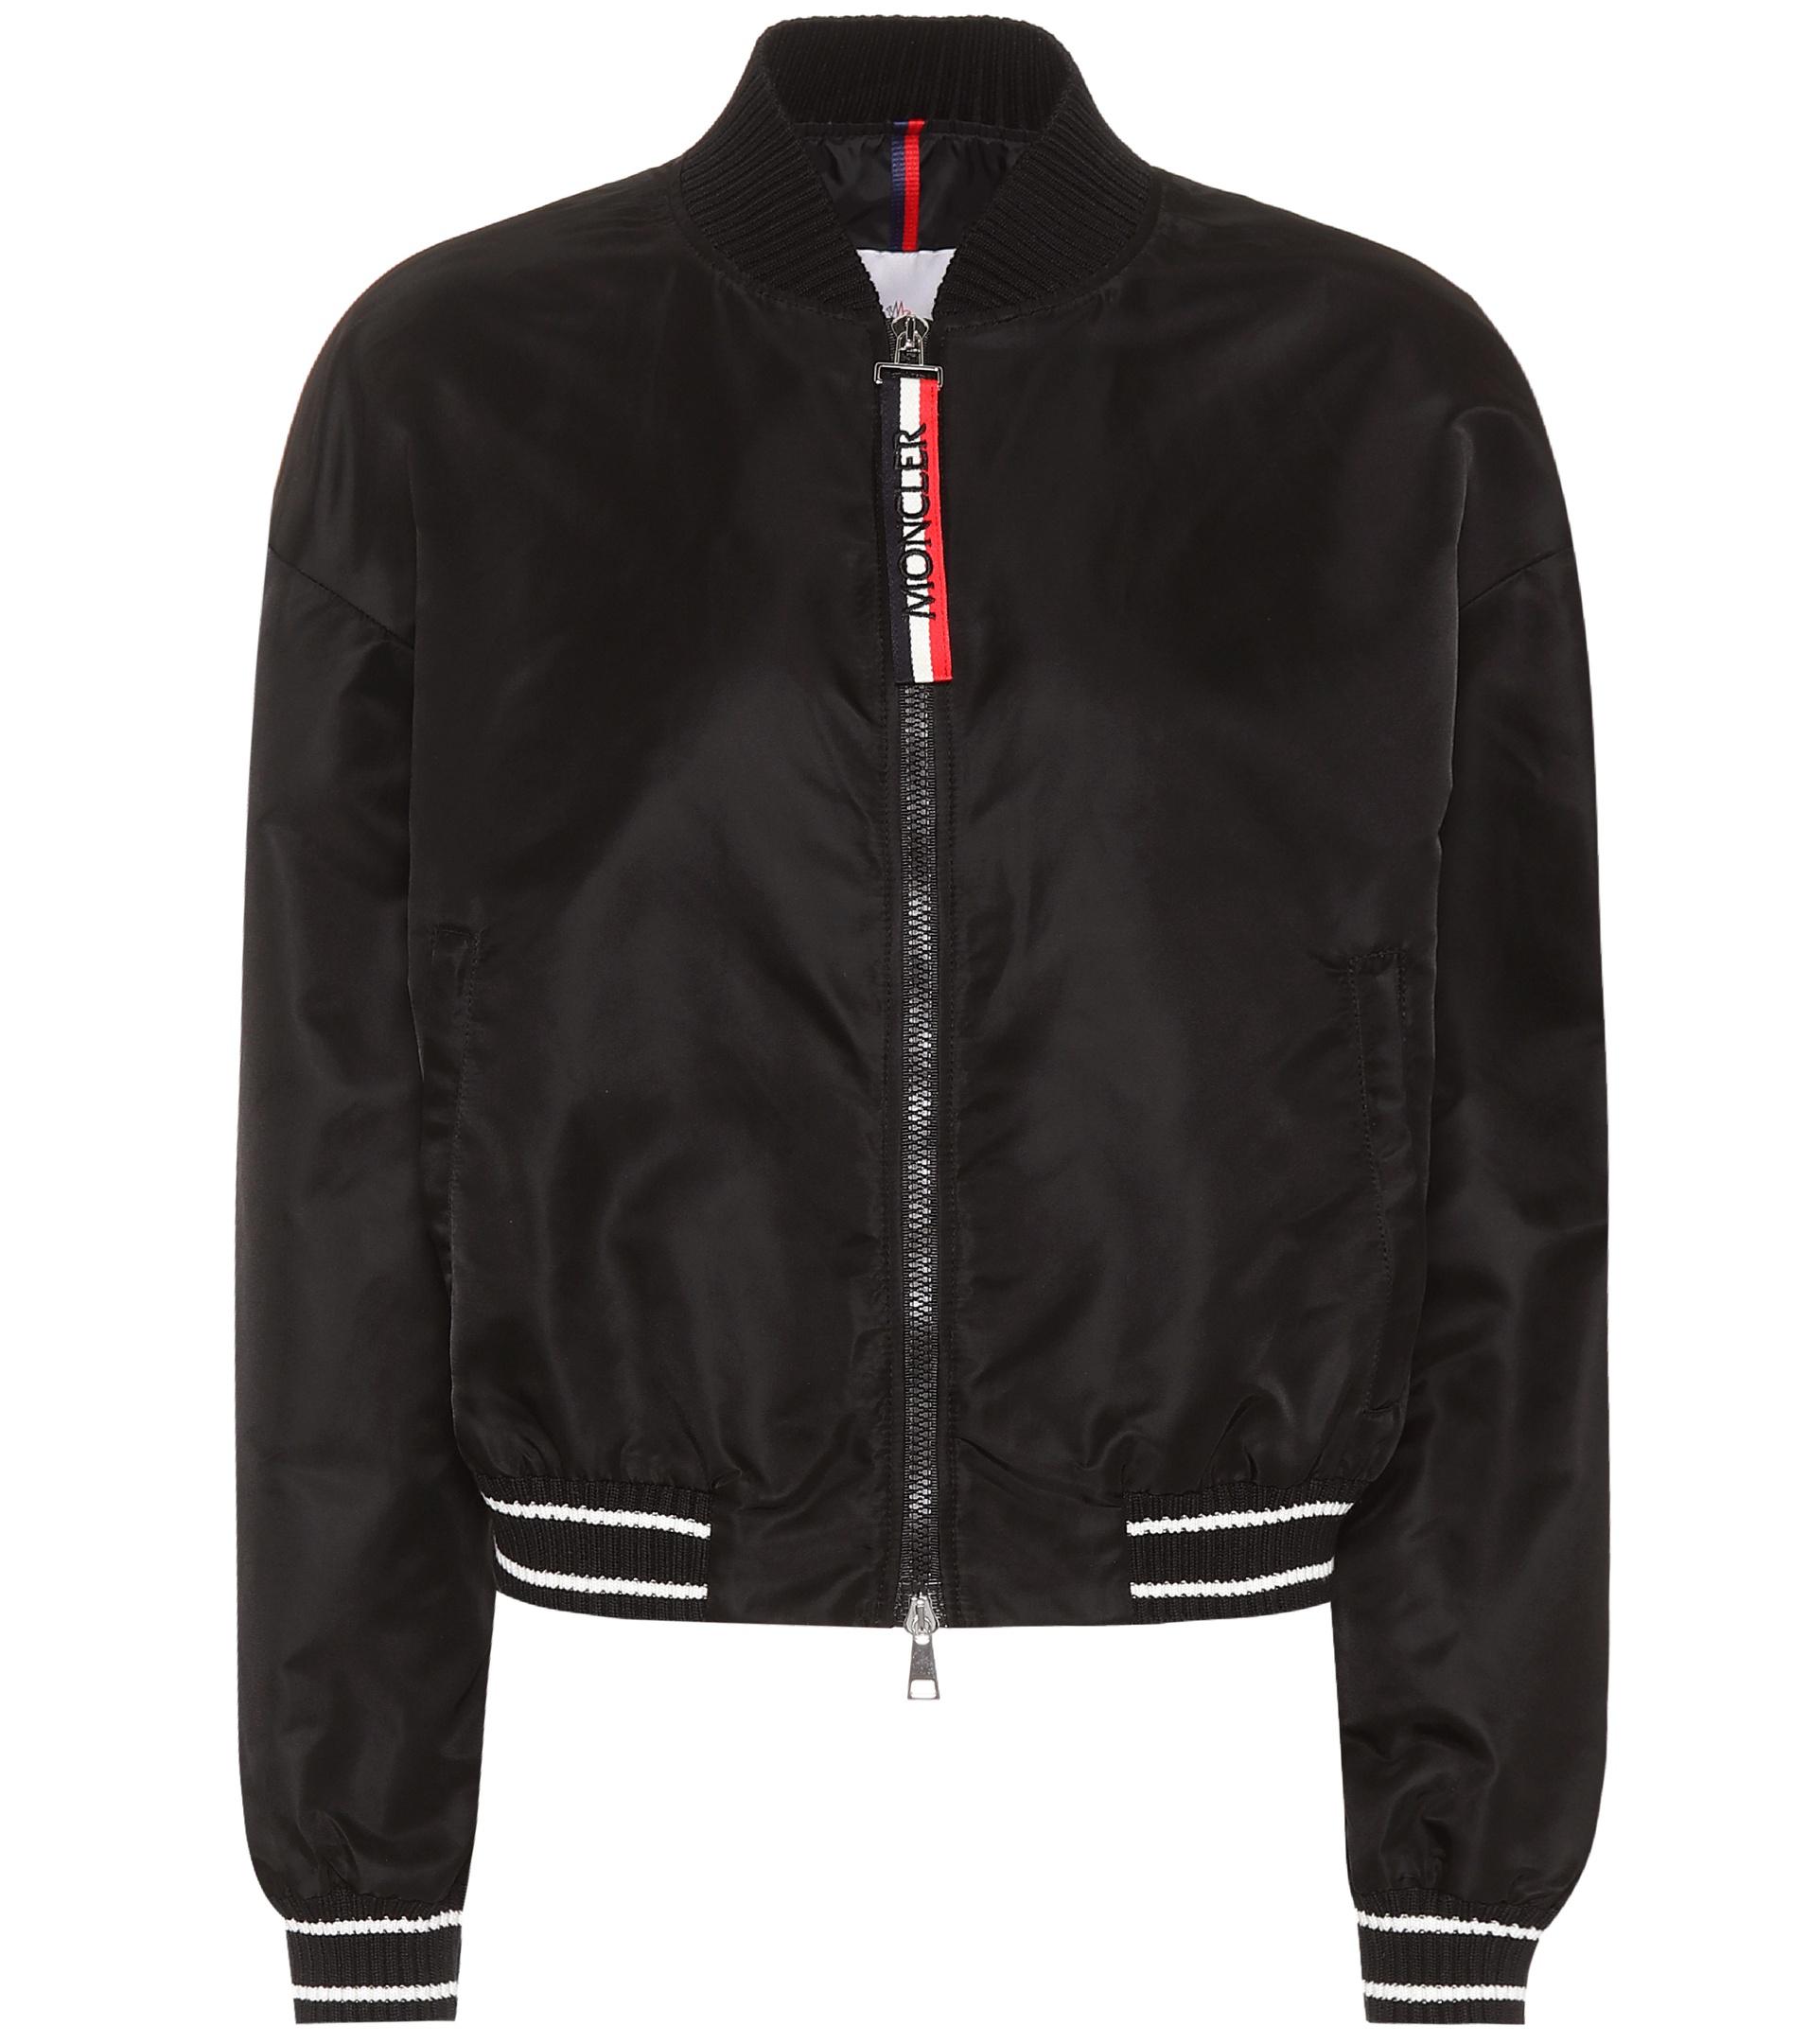 Moncler Actinote Satin Bomber Jacket in Black - Lyst